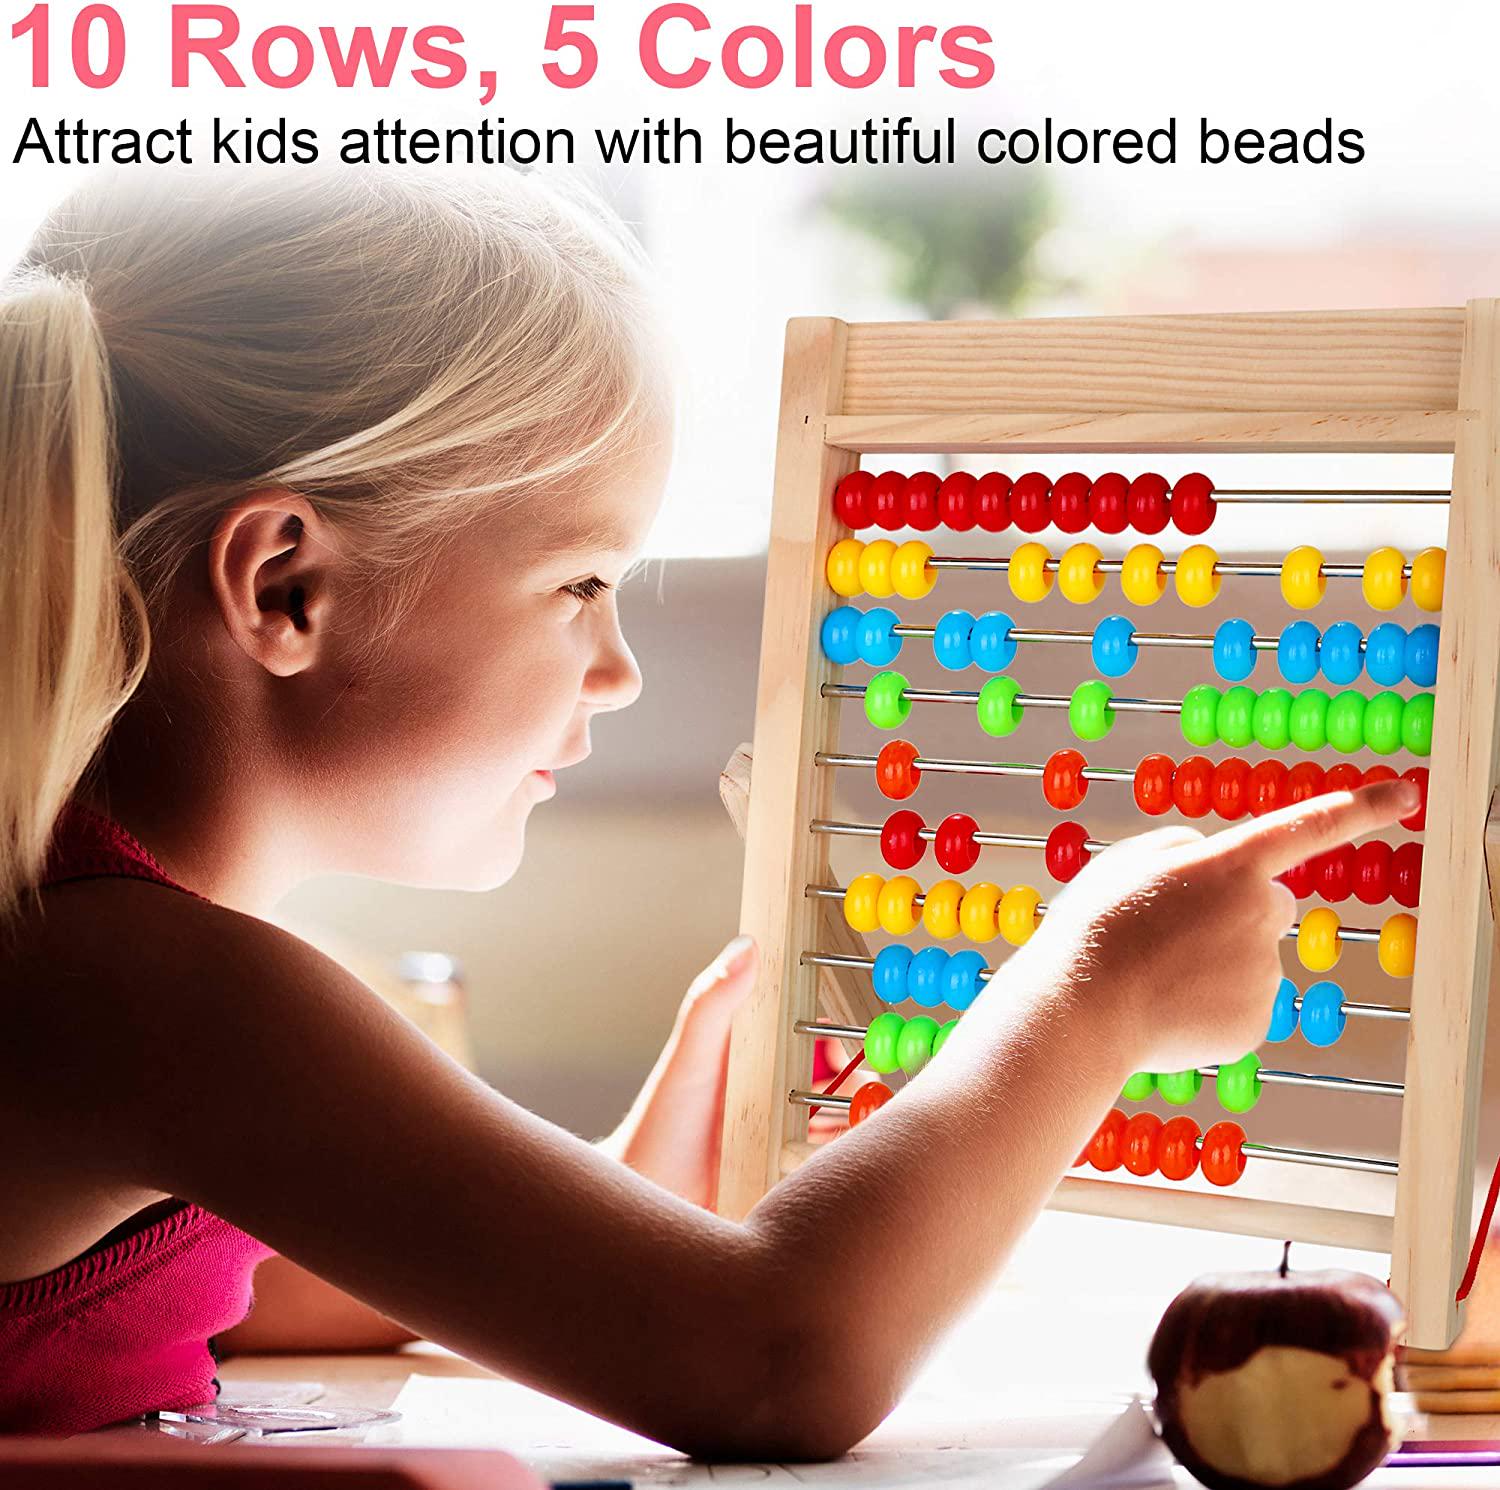 KIDWILL, KIDWILL Kids Learning Toy, 10-Row Wooden Frame Abacus with Multi-Color Beads, Counting Sticks, Number Alphabet Cards, Manipulative Math Calculating Tool Gift for 3+ Old Boys Girls